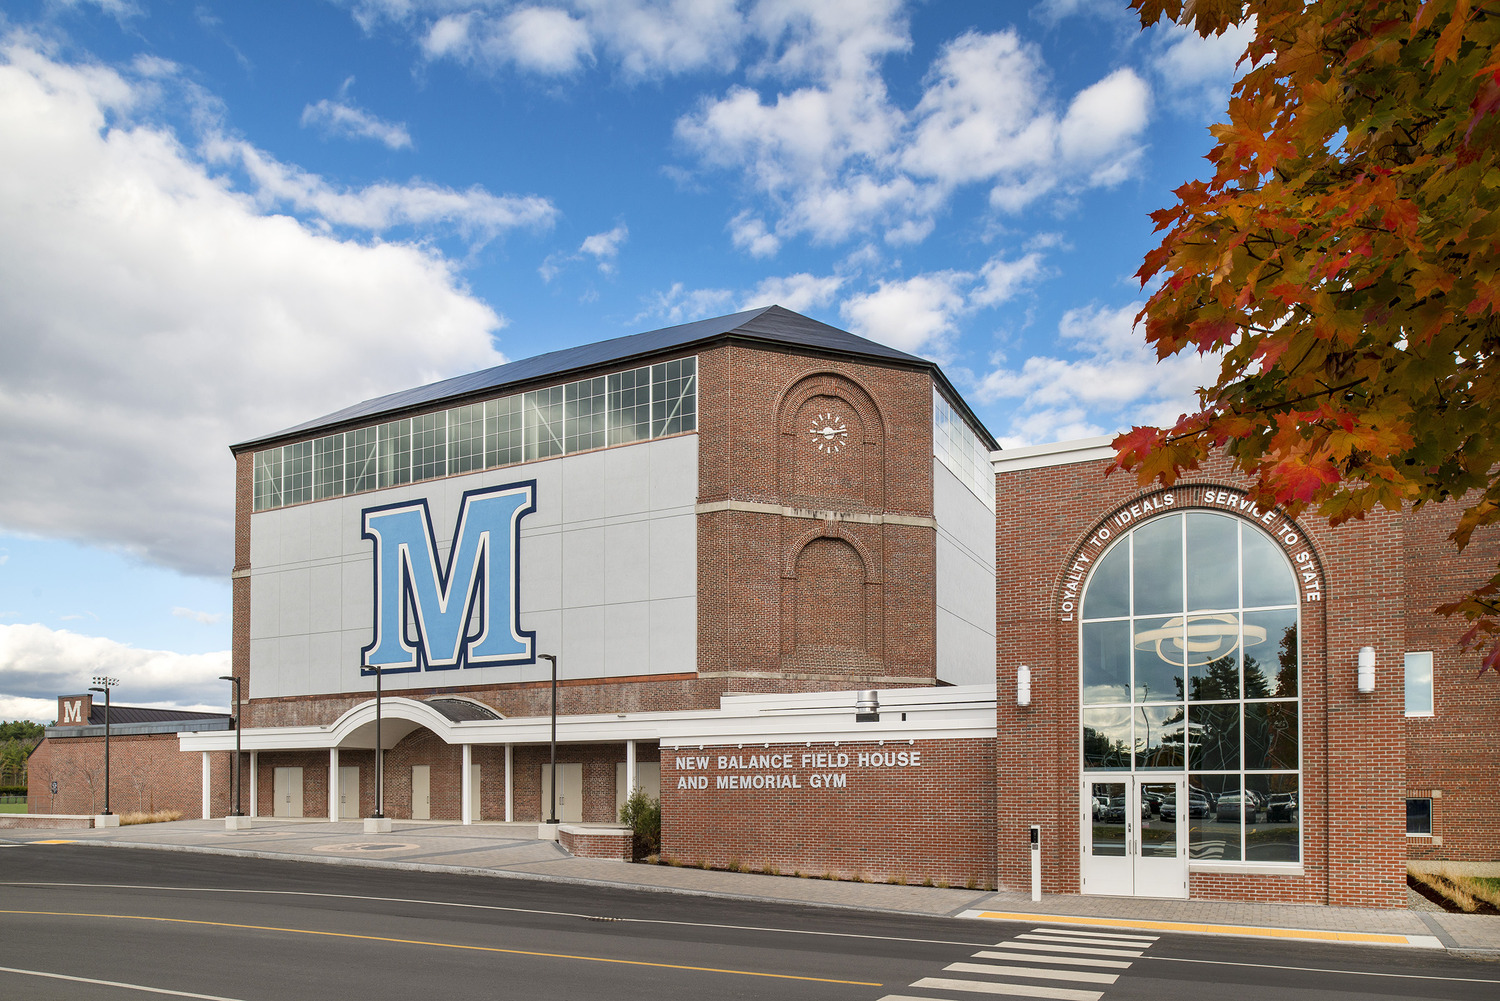 University of Maine New Balance Field House and Memorial Gym